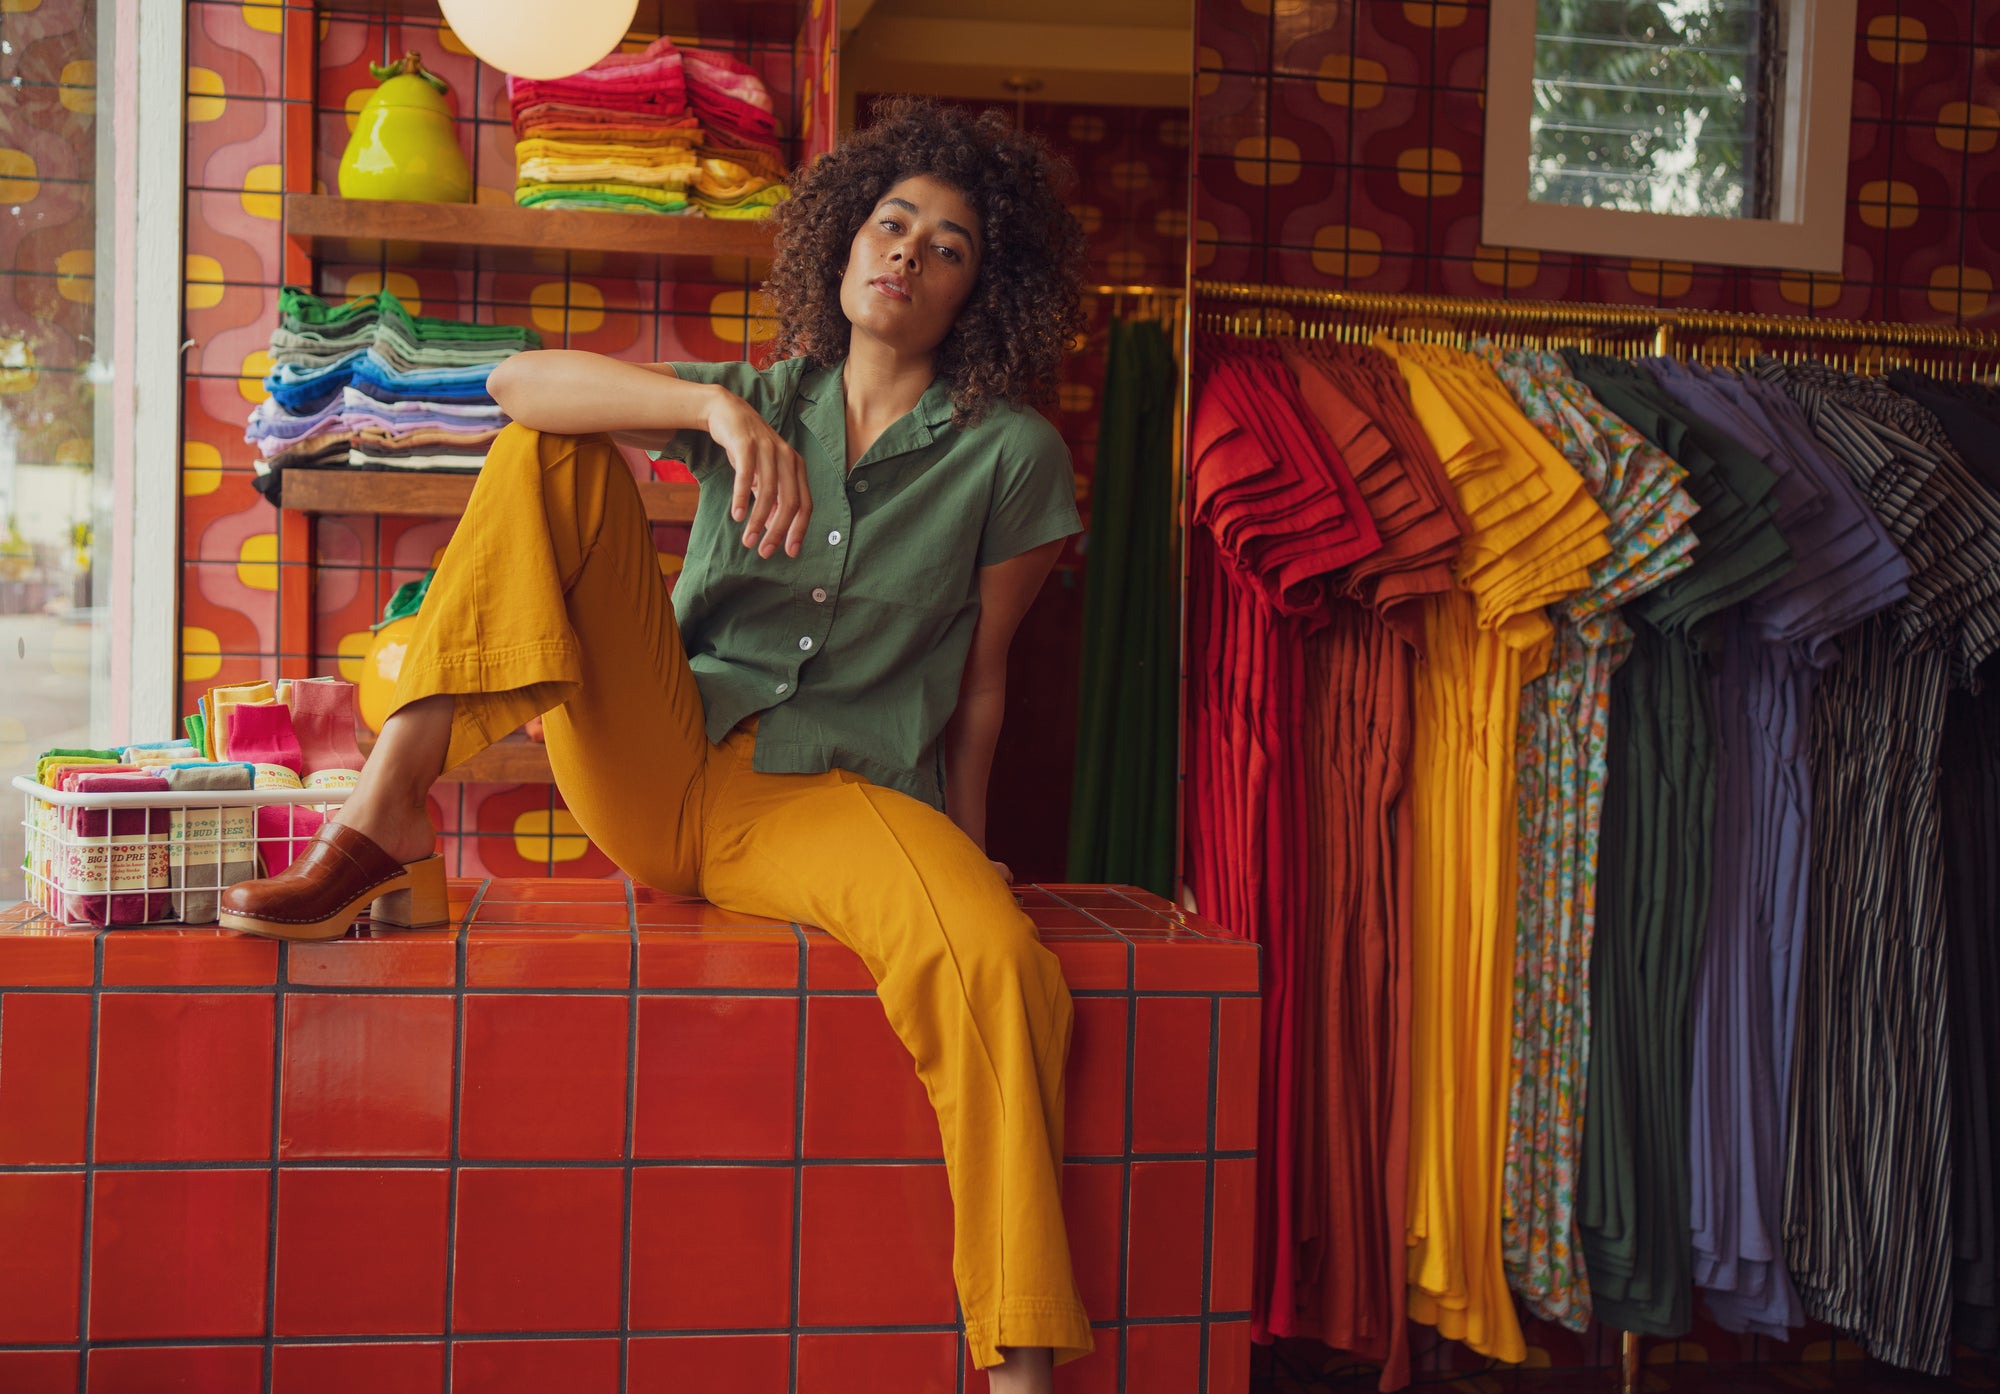 Shelby wearing Pantry Button-Up in Dark Emerald Green and Western Pants in Spicy Mustard